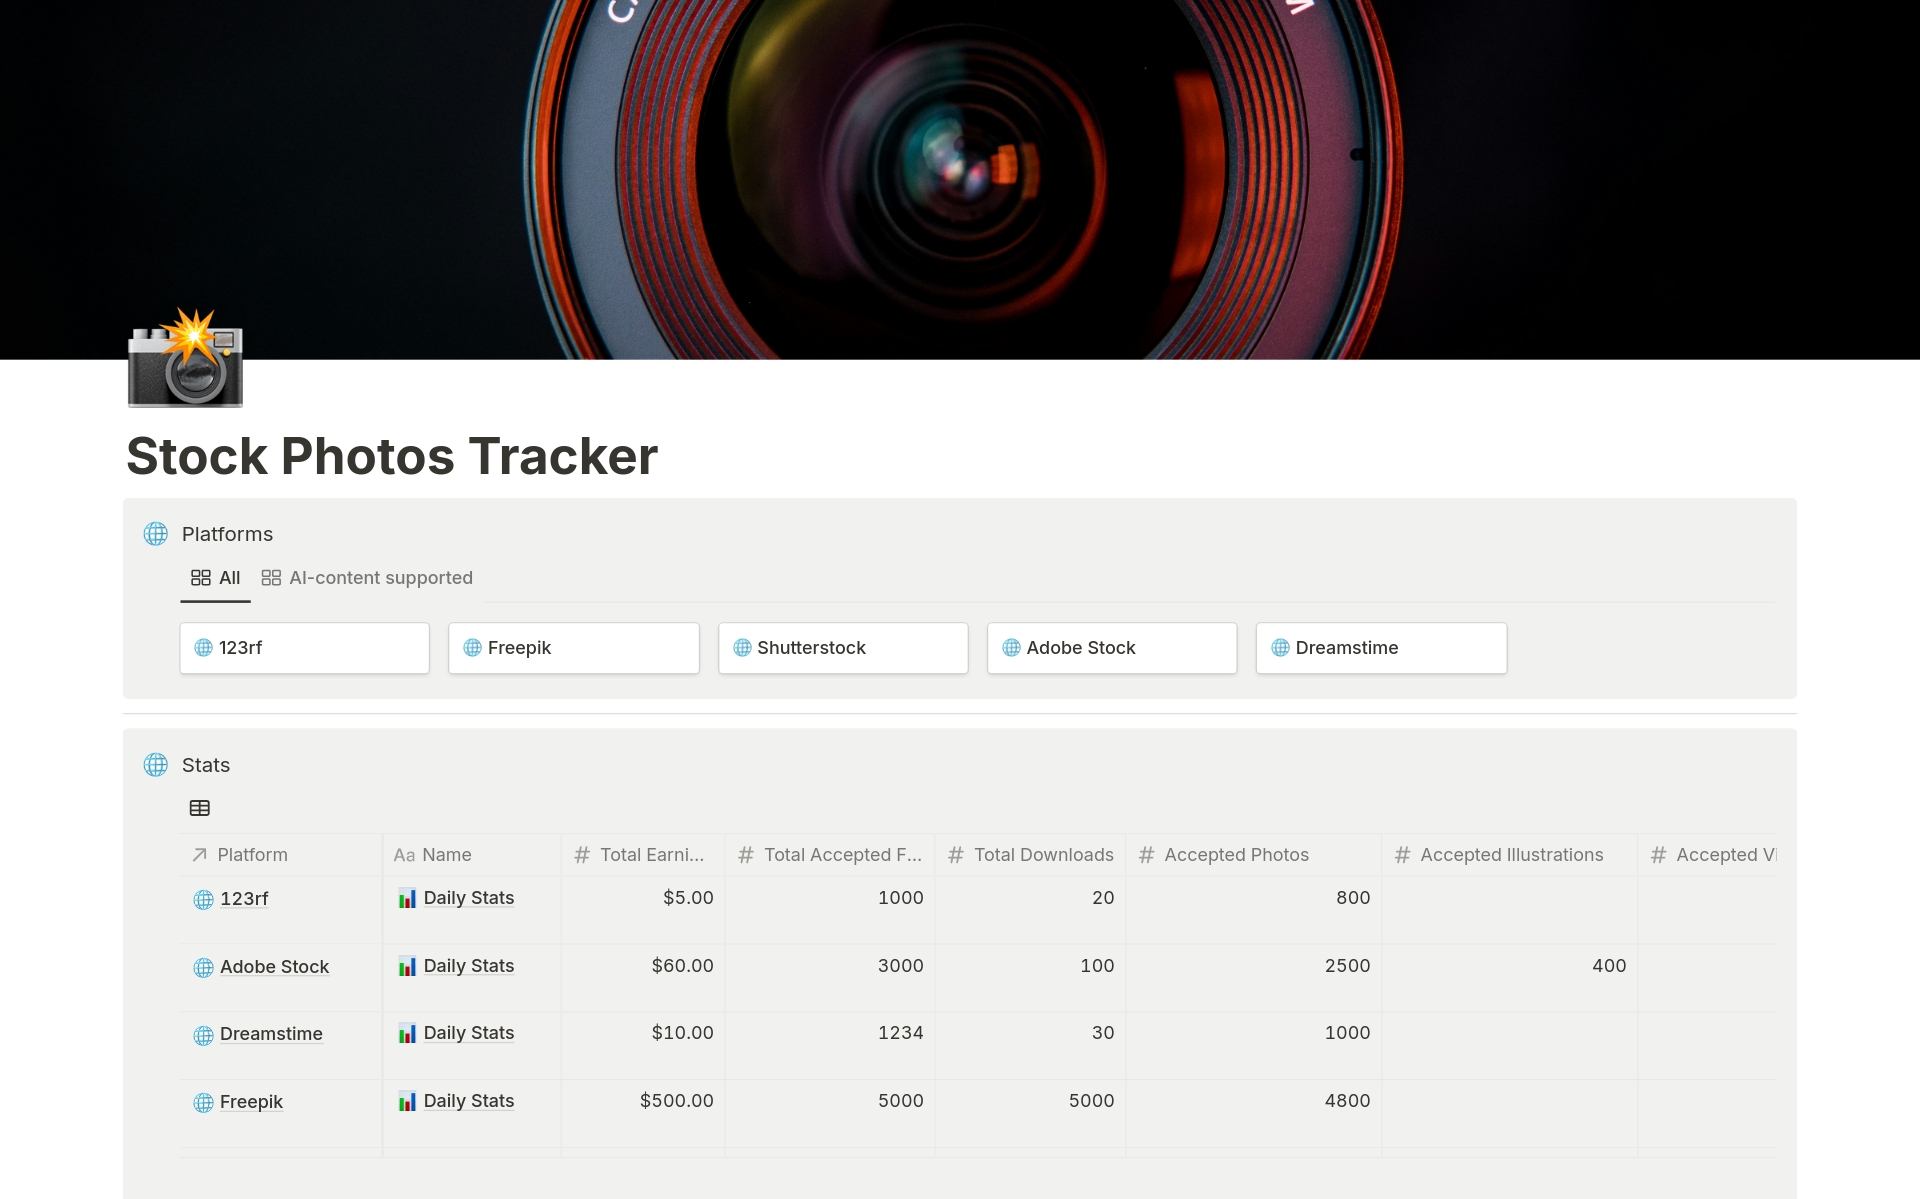 Effortlessly track your stock photography income with this Notion template. View detailed stats for each platform and get an overall earnings snapshot. Ideal for photographers who want to stay organized and informed.